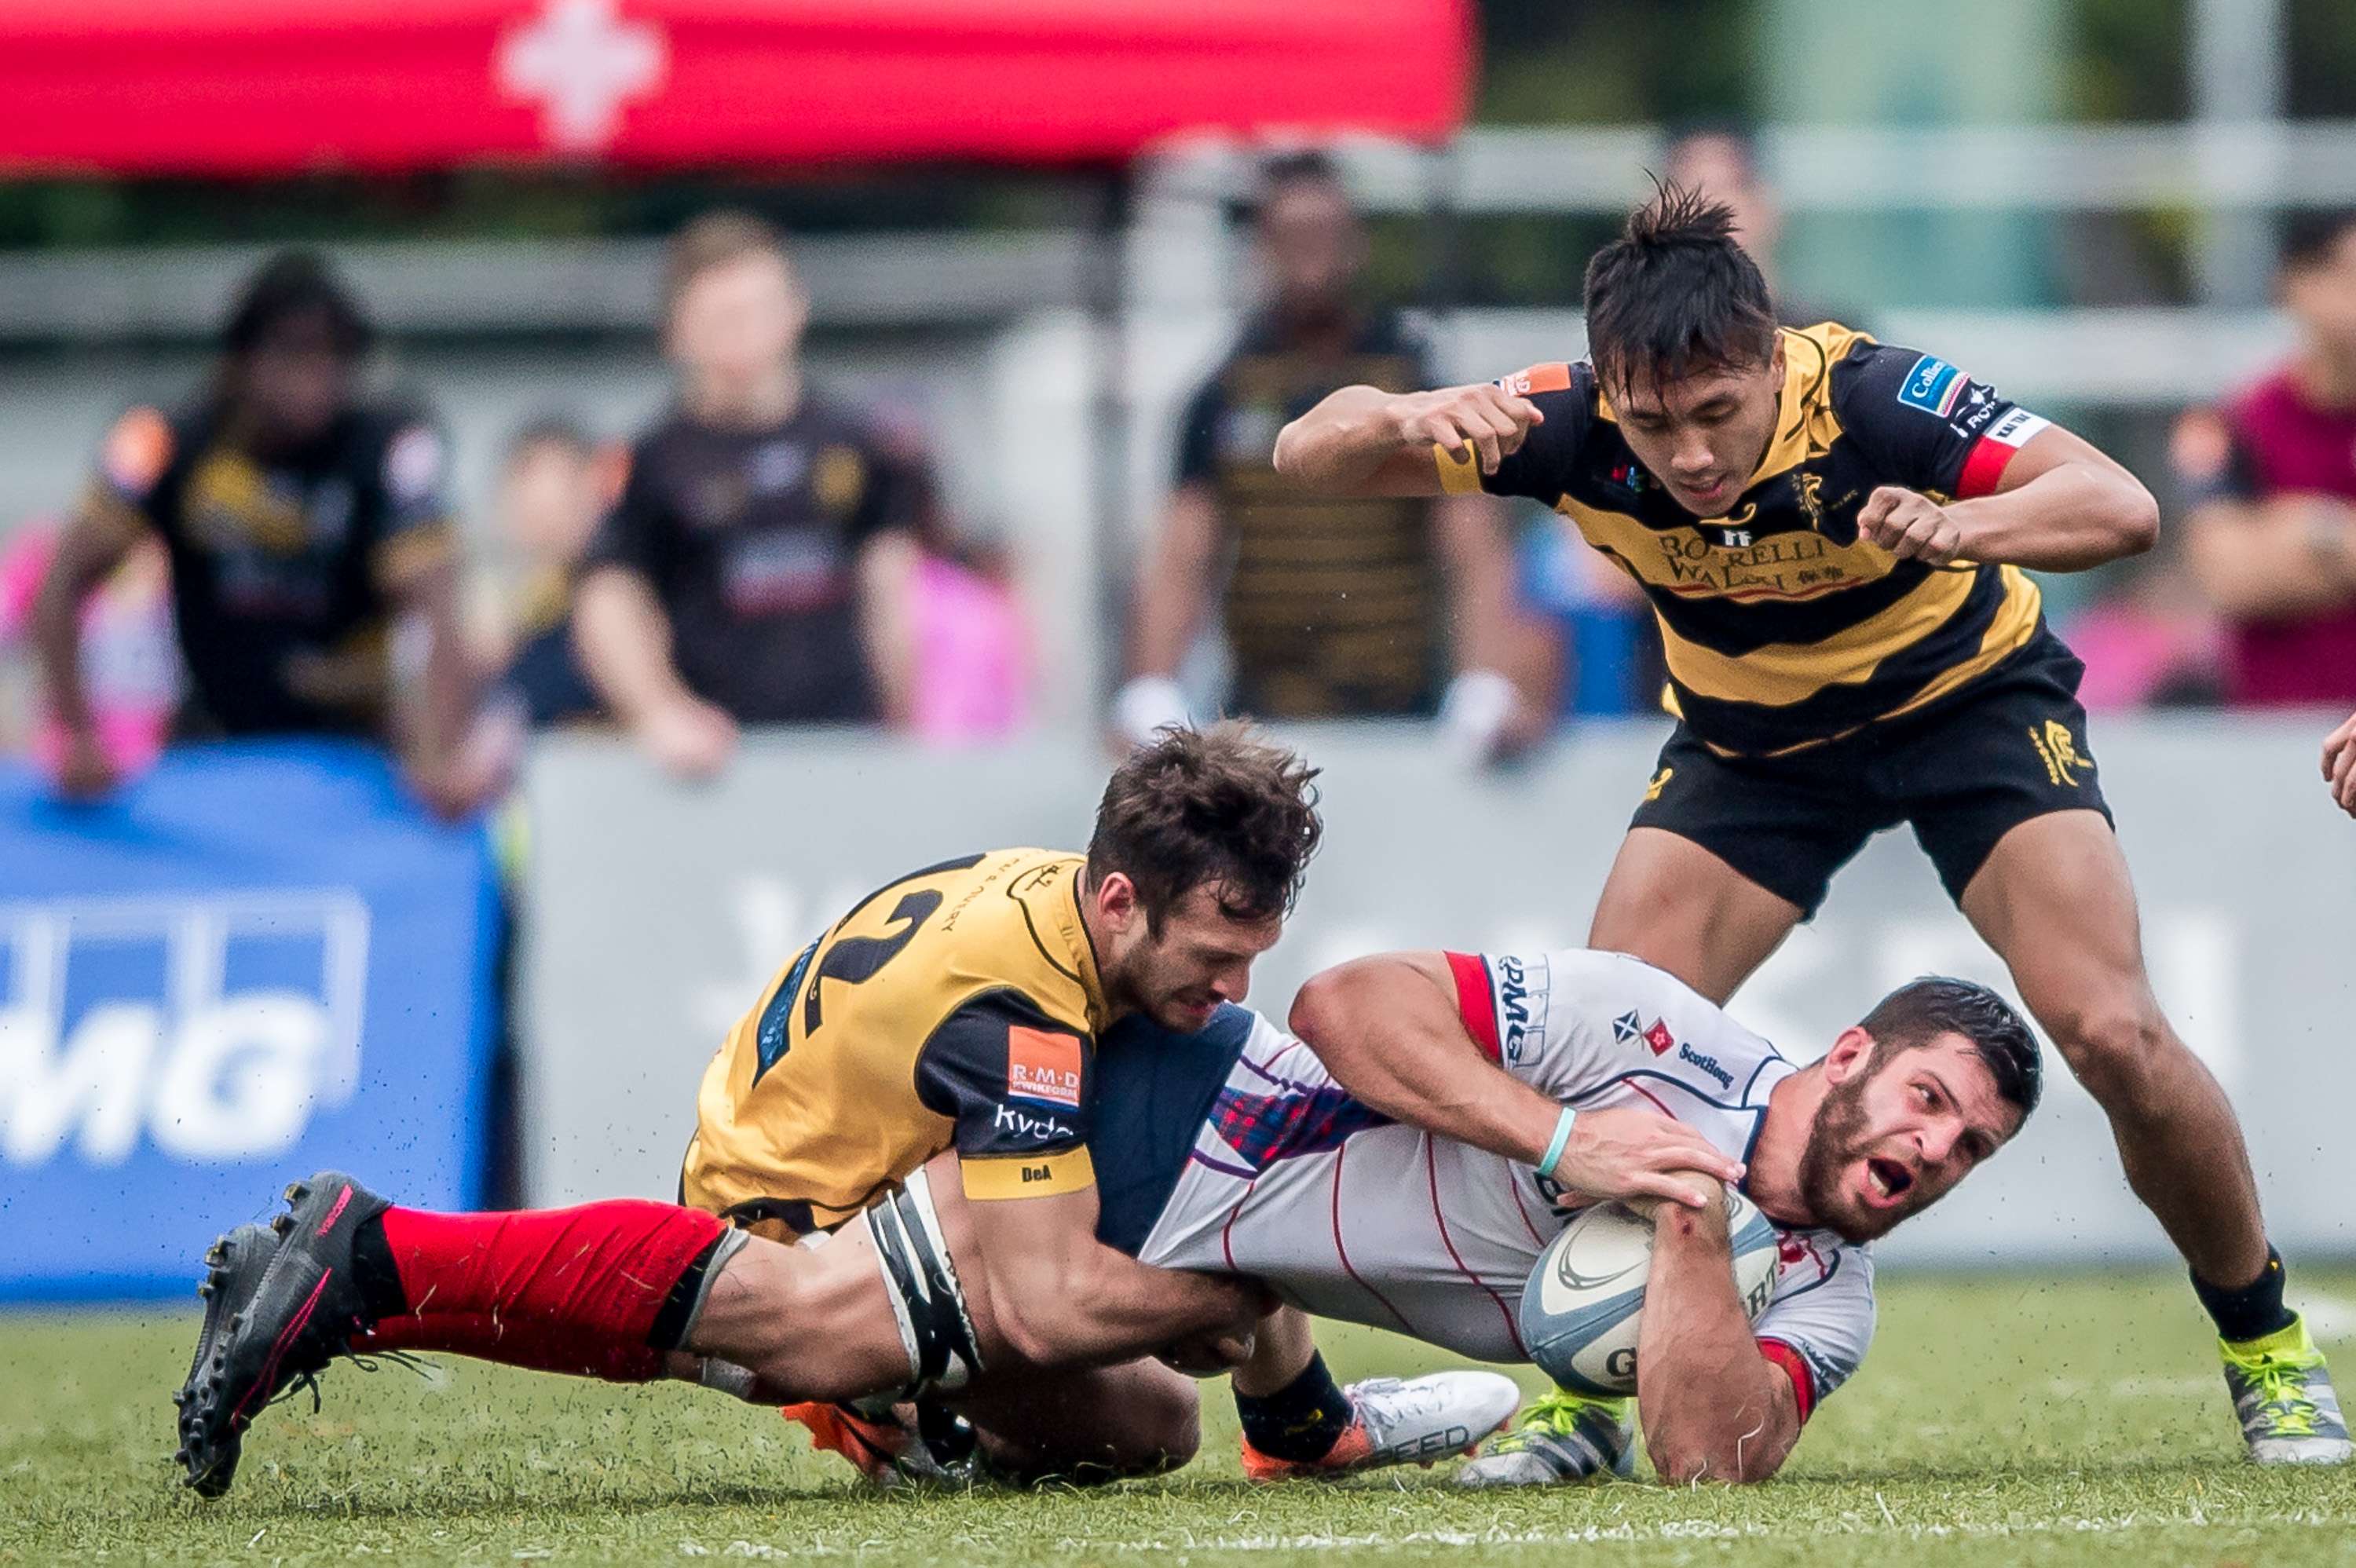 HK Scottish captain Kane Boucaut is brought to ground as his side come from 14 points down to defeat Tigers in the Hong Kong Premiership on Saturday. Photos: HKRU